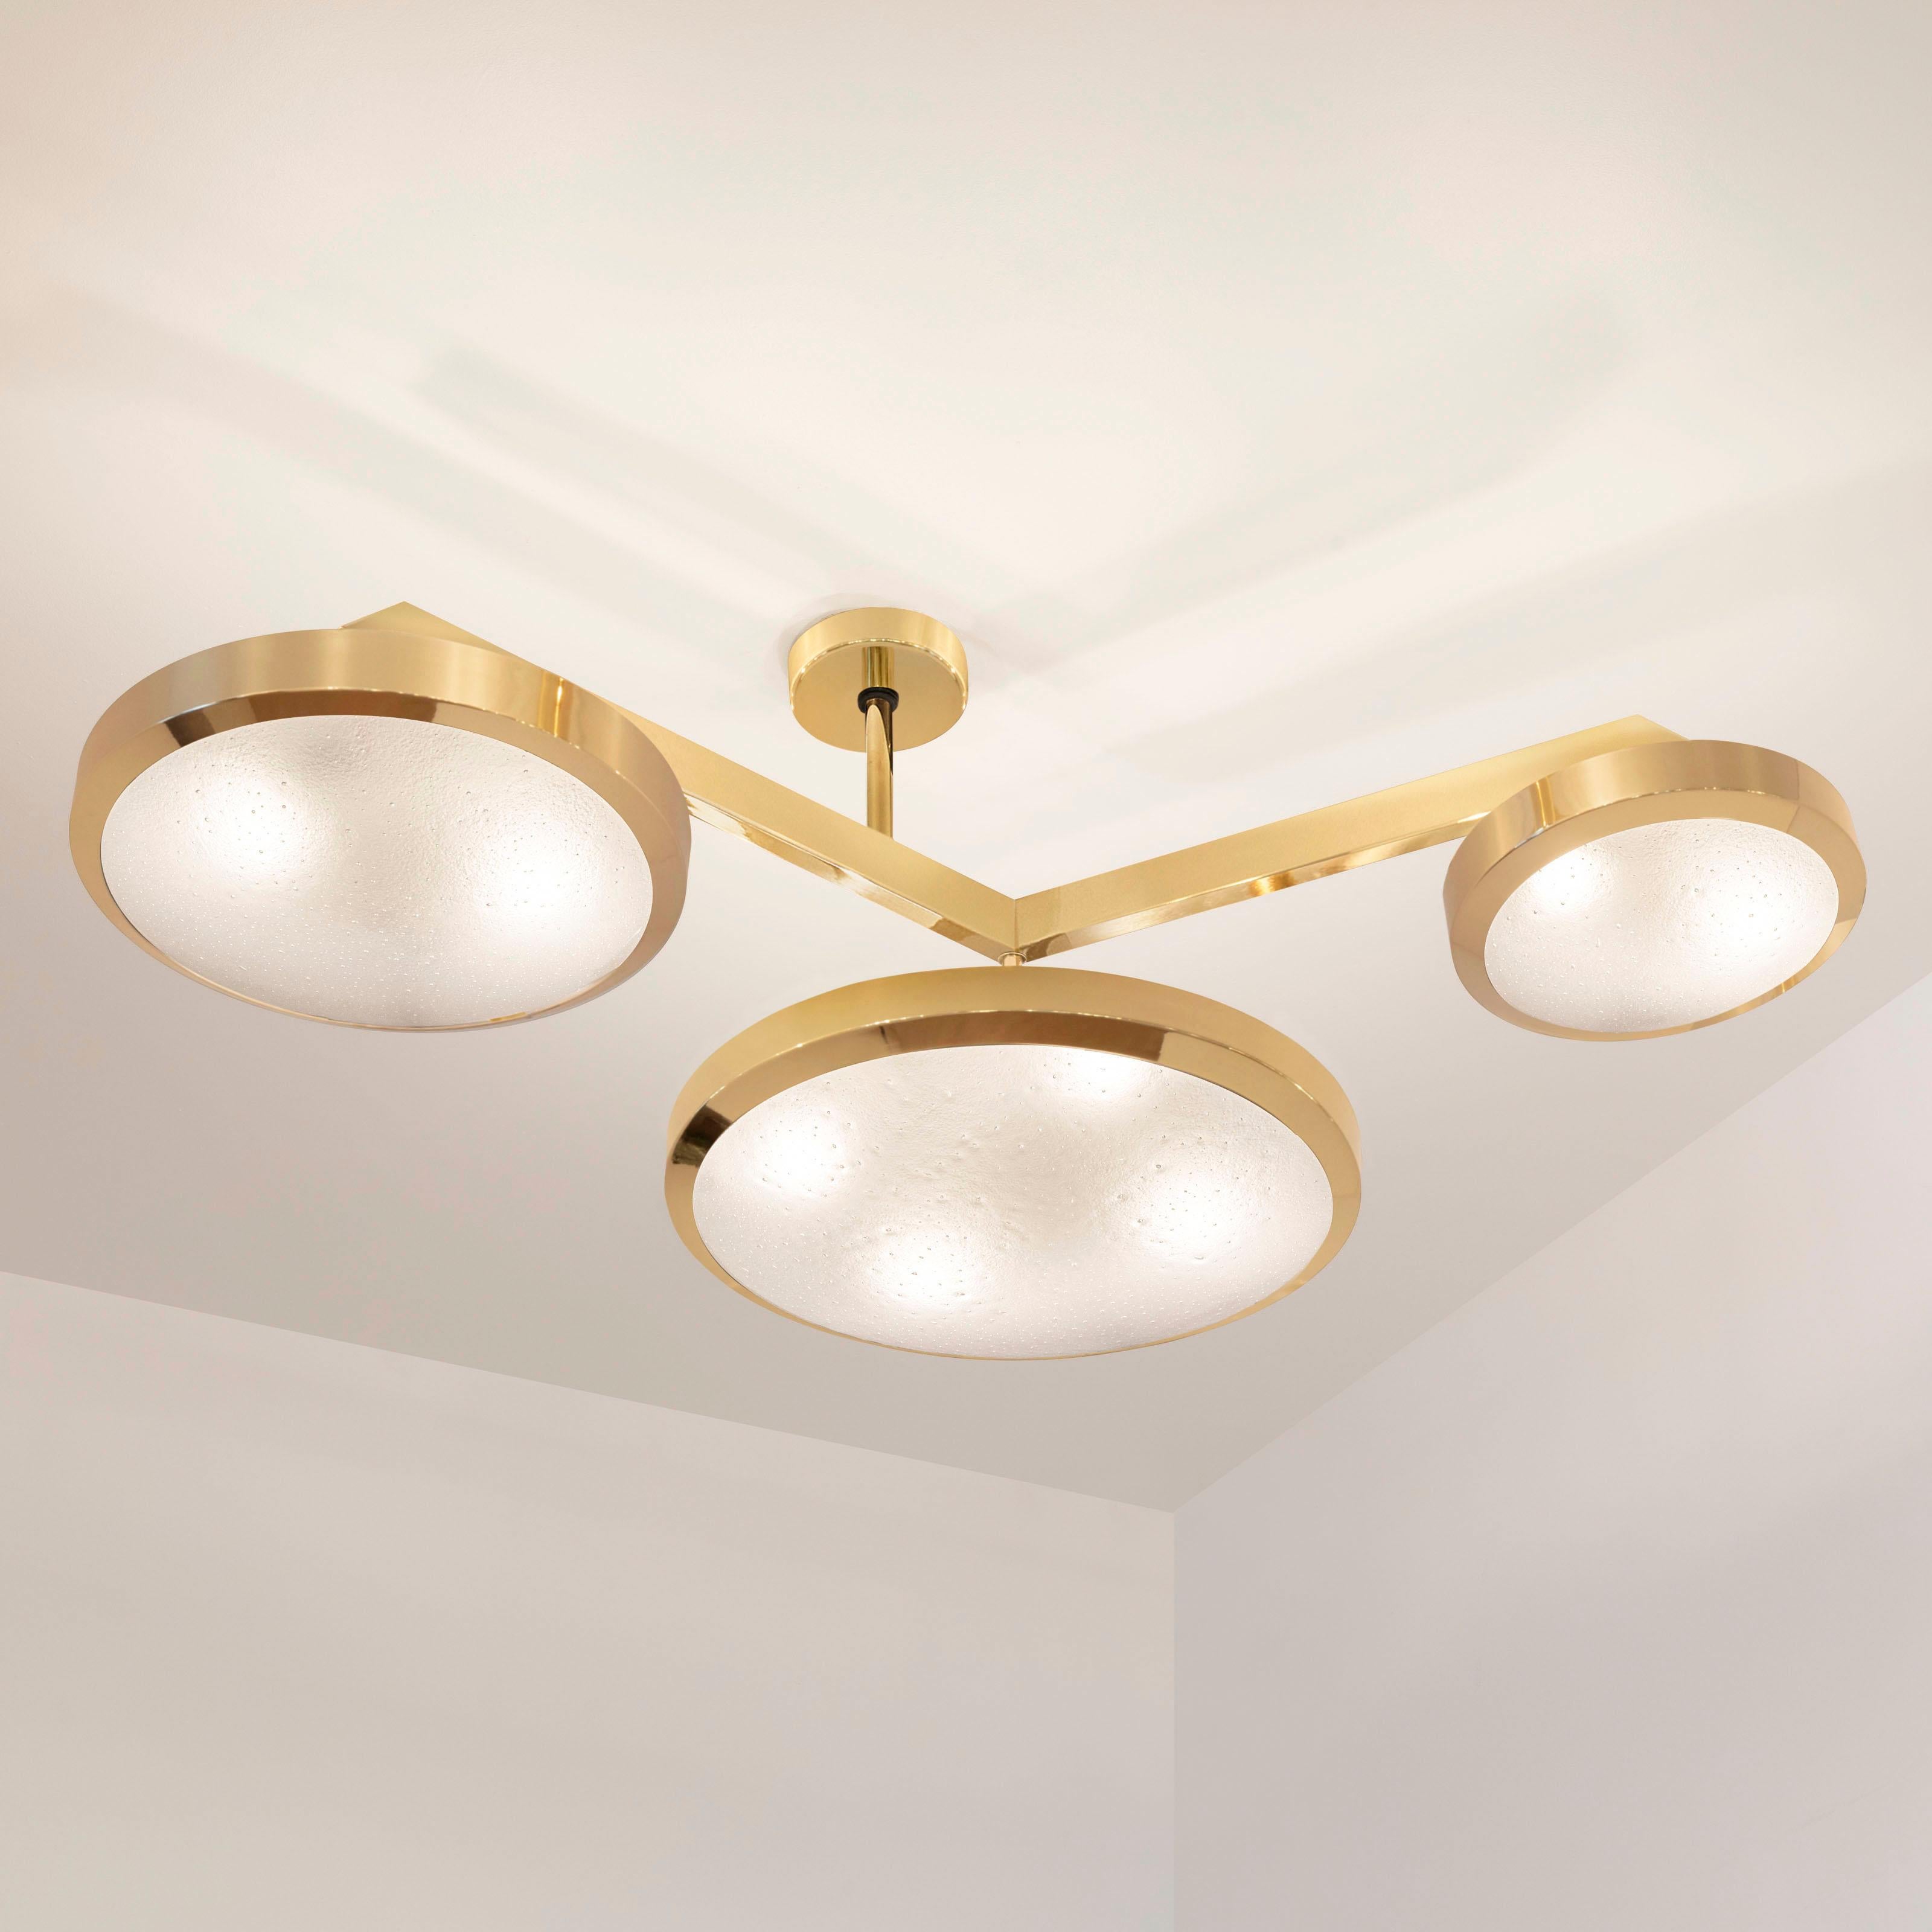 Brass Zeta Ceiling Light by Gaspare Asaro - Bronze Finish For Sale